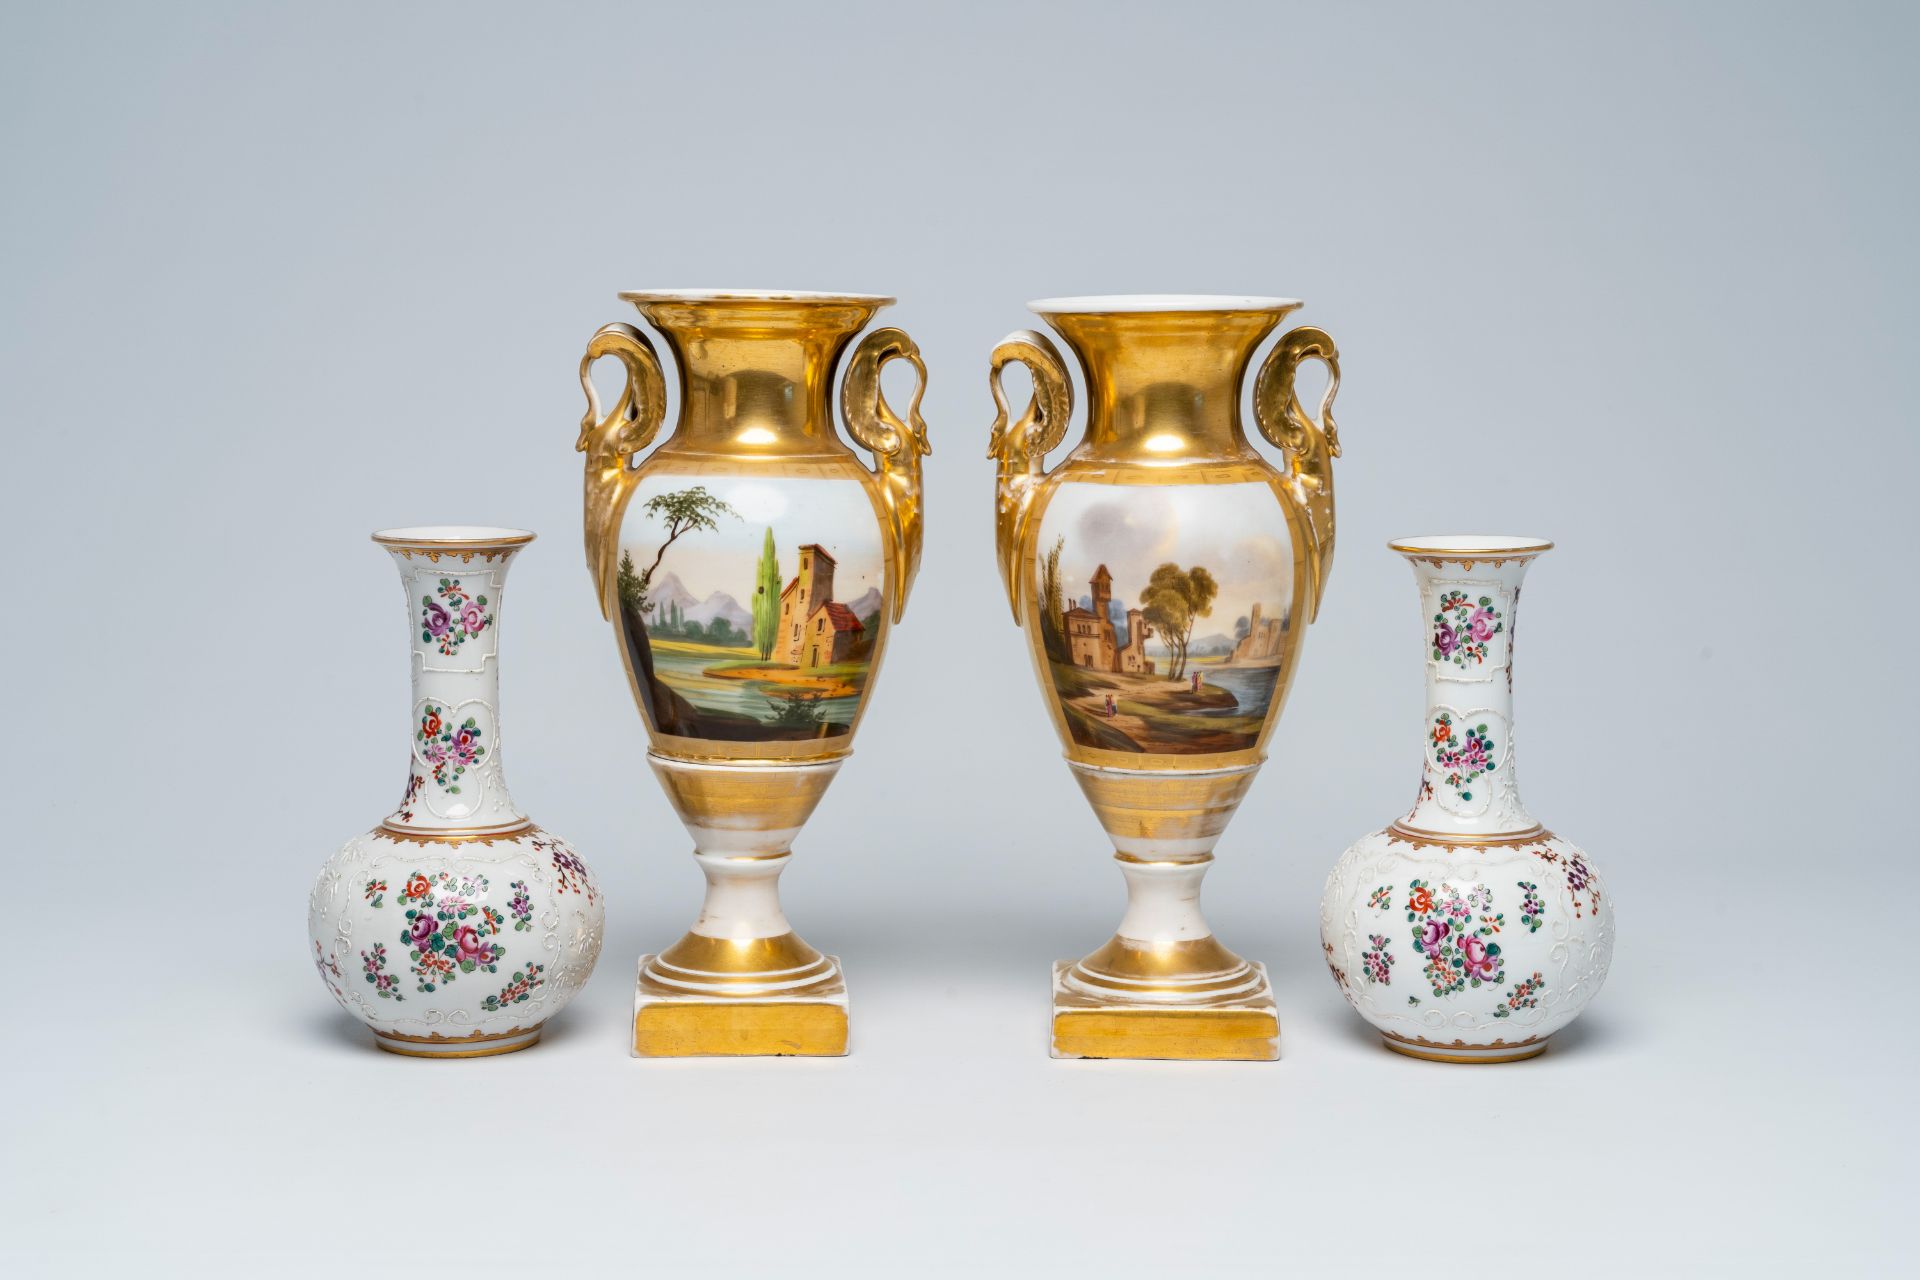 A pair of French gilt and polychrome vases and a pair of famille rose style vases with a coat of arm - Image 4 of 8